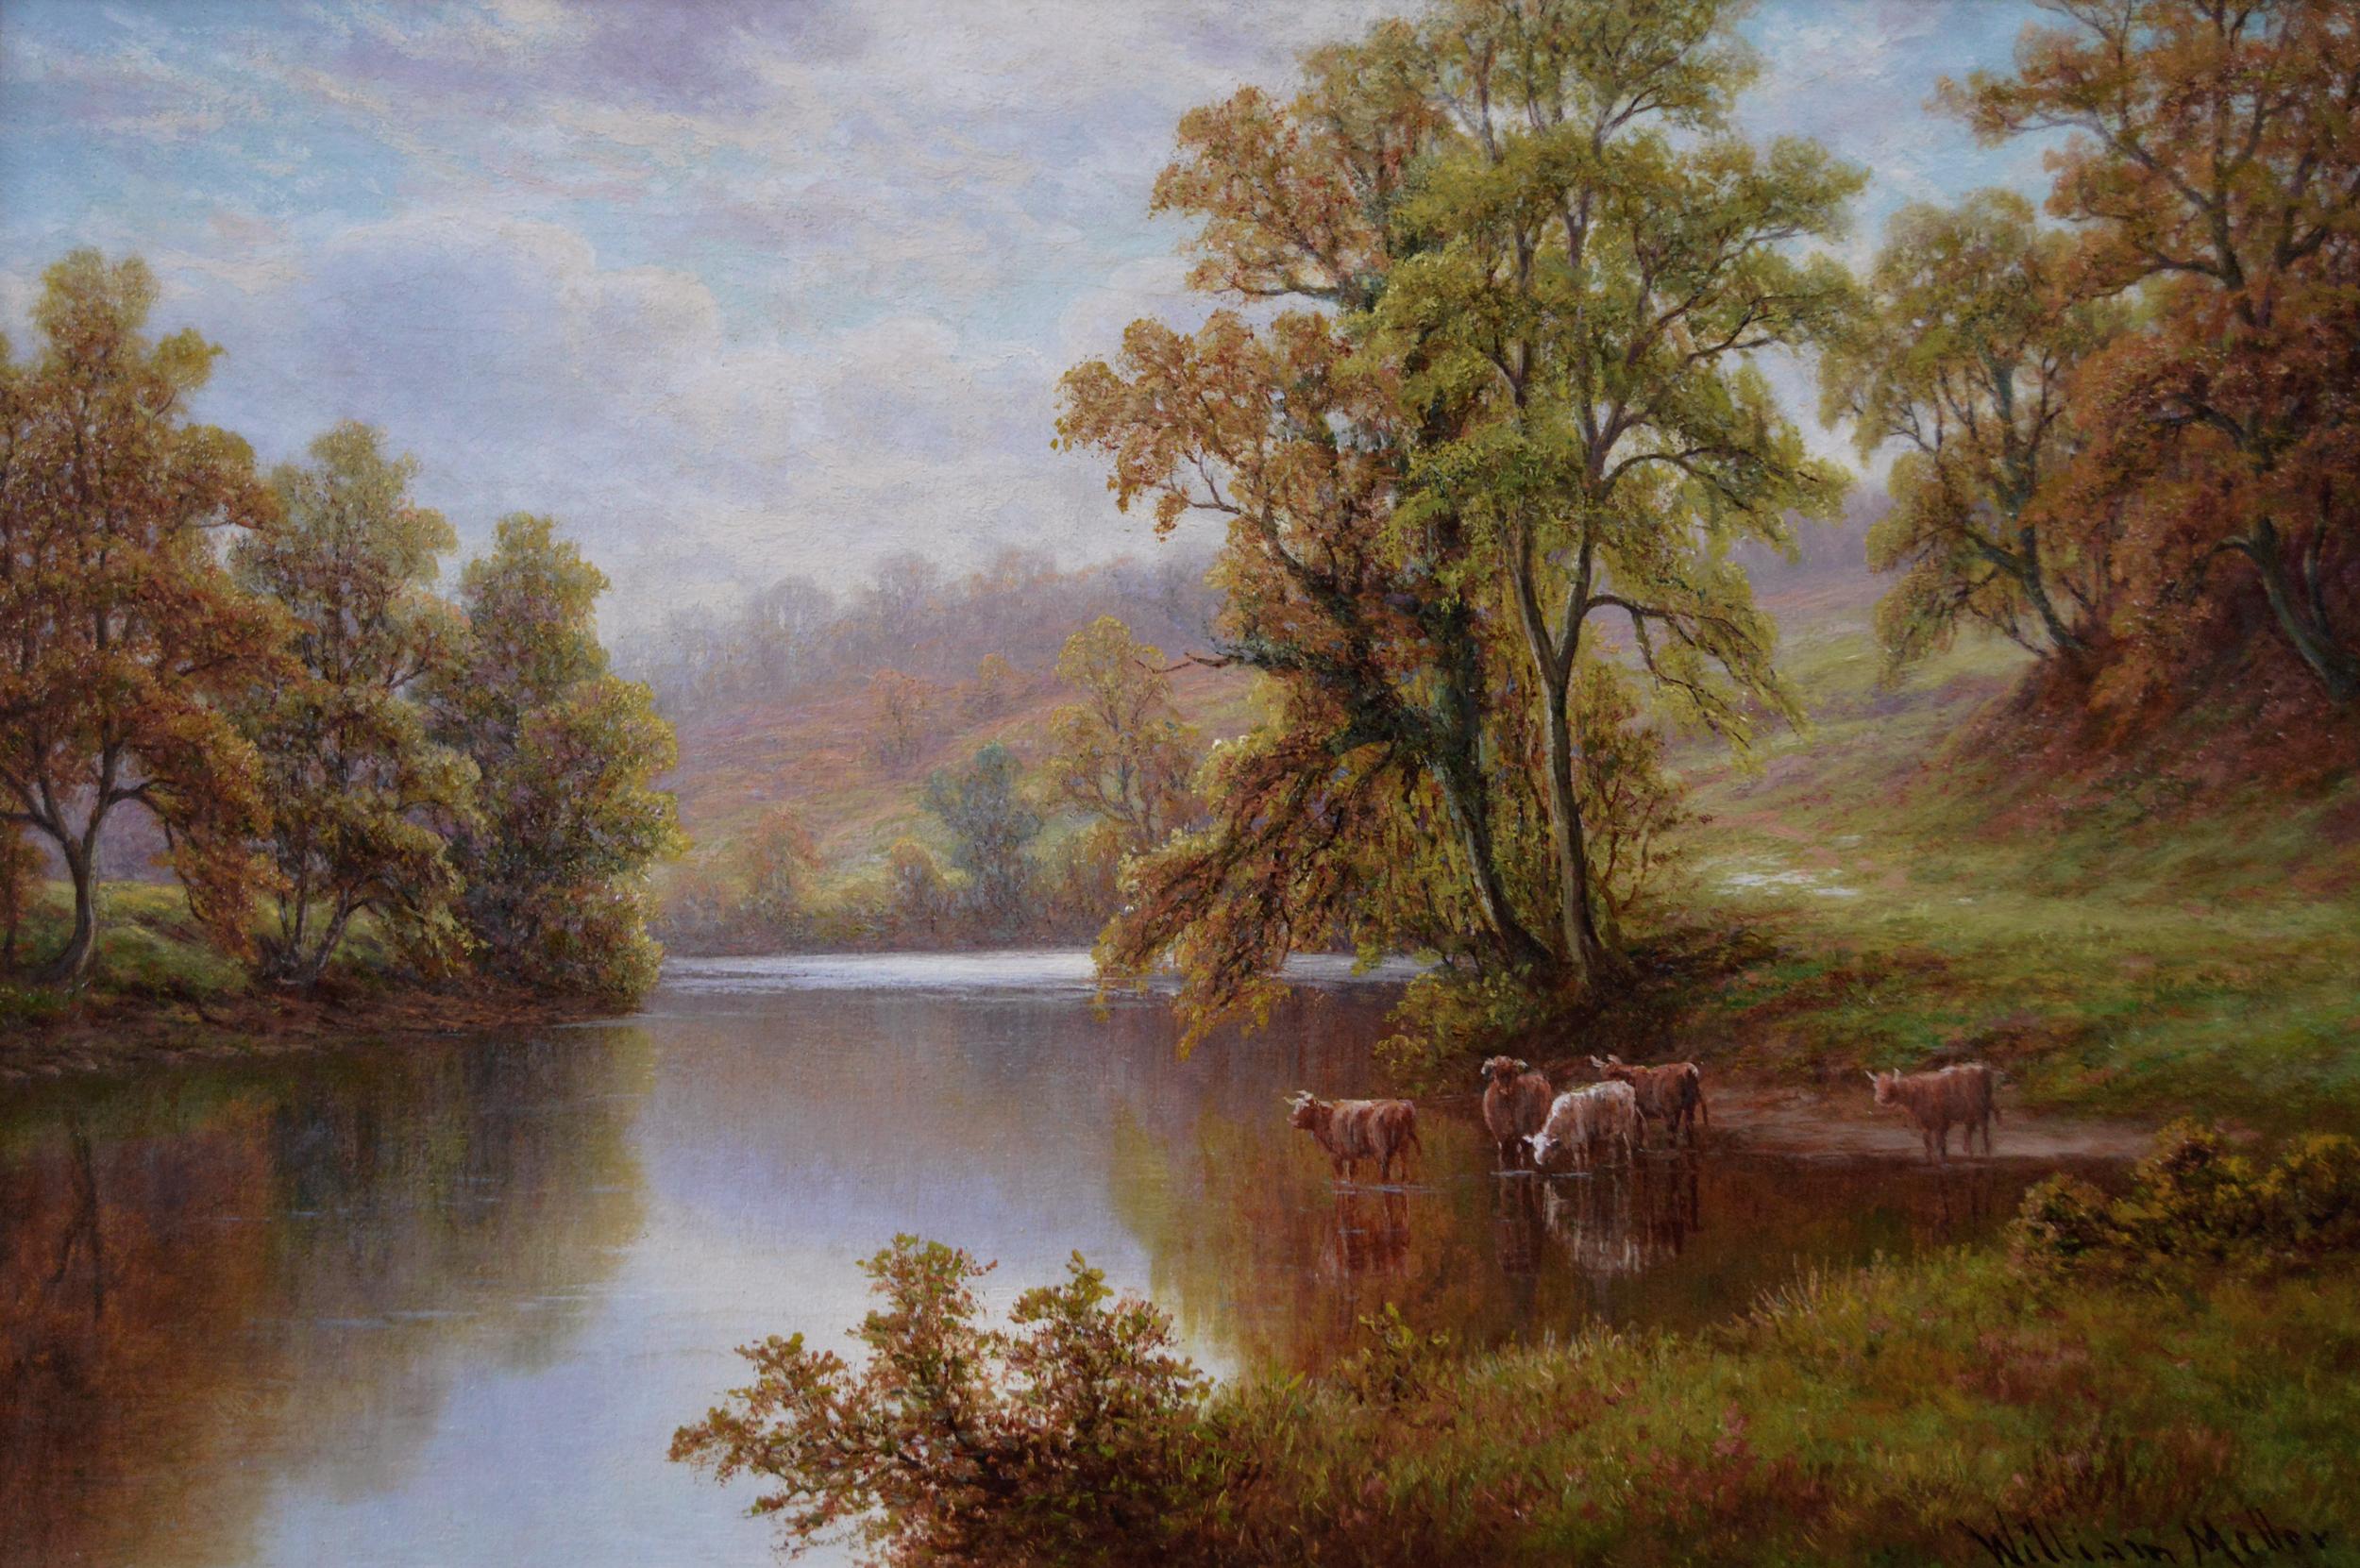 ***PLEASE NOTE: EACH PAINTING INCLUDING THE FRAME MEASURES 17.5 INCHES X 23.5 INCHES***

William Mellor
British, (1851-1931)
Posforth Ghyll, Bolton Woods & On the Nidd near Knaresborough, Yorkshire
Oil on canvas, pair, both signed & further